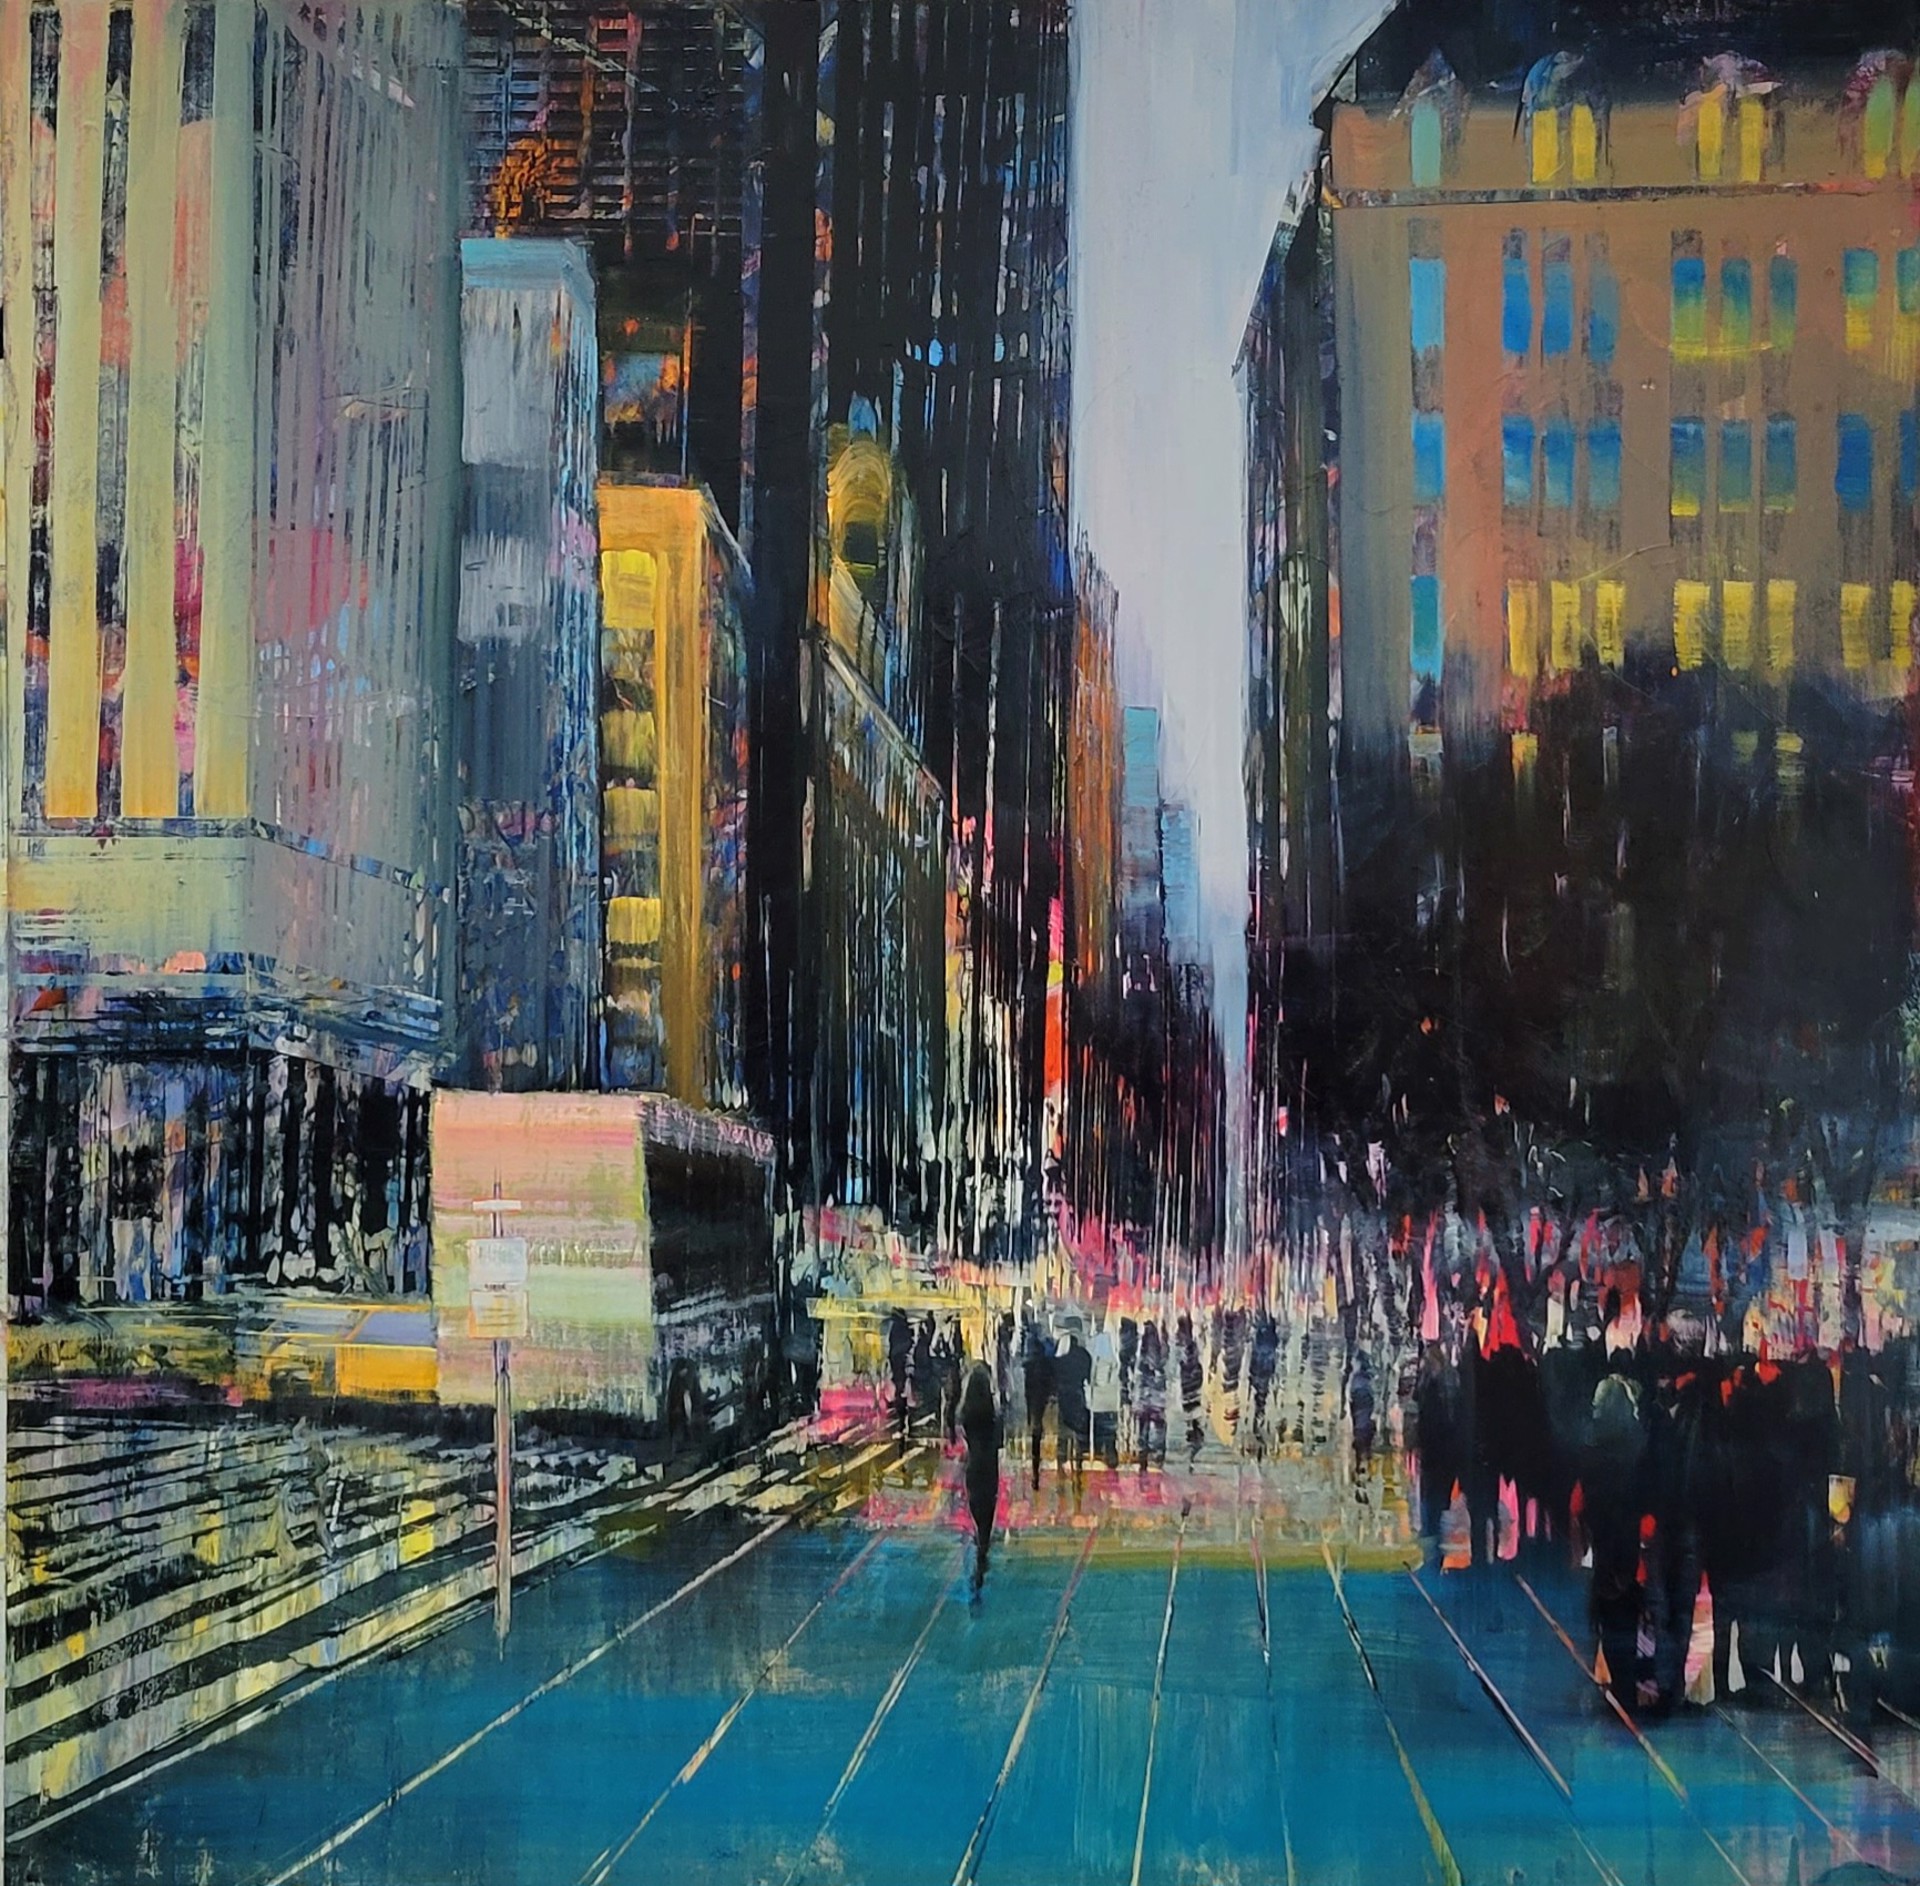 Nocturne on 5th Avenue by David Dunlop